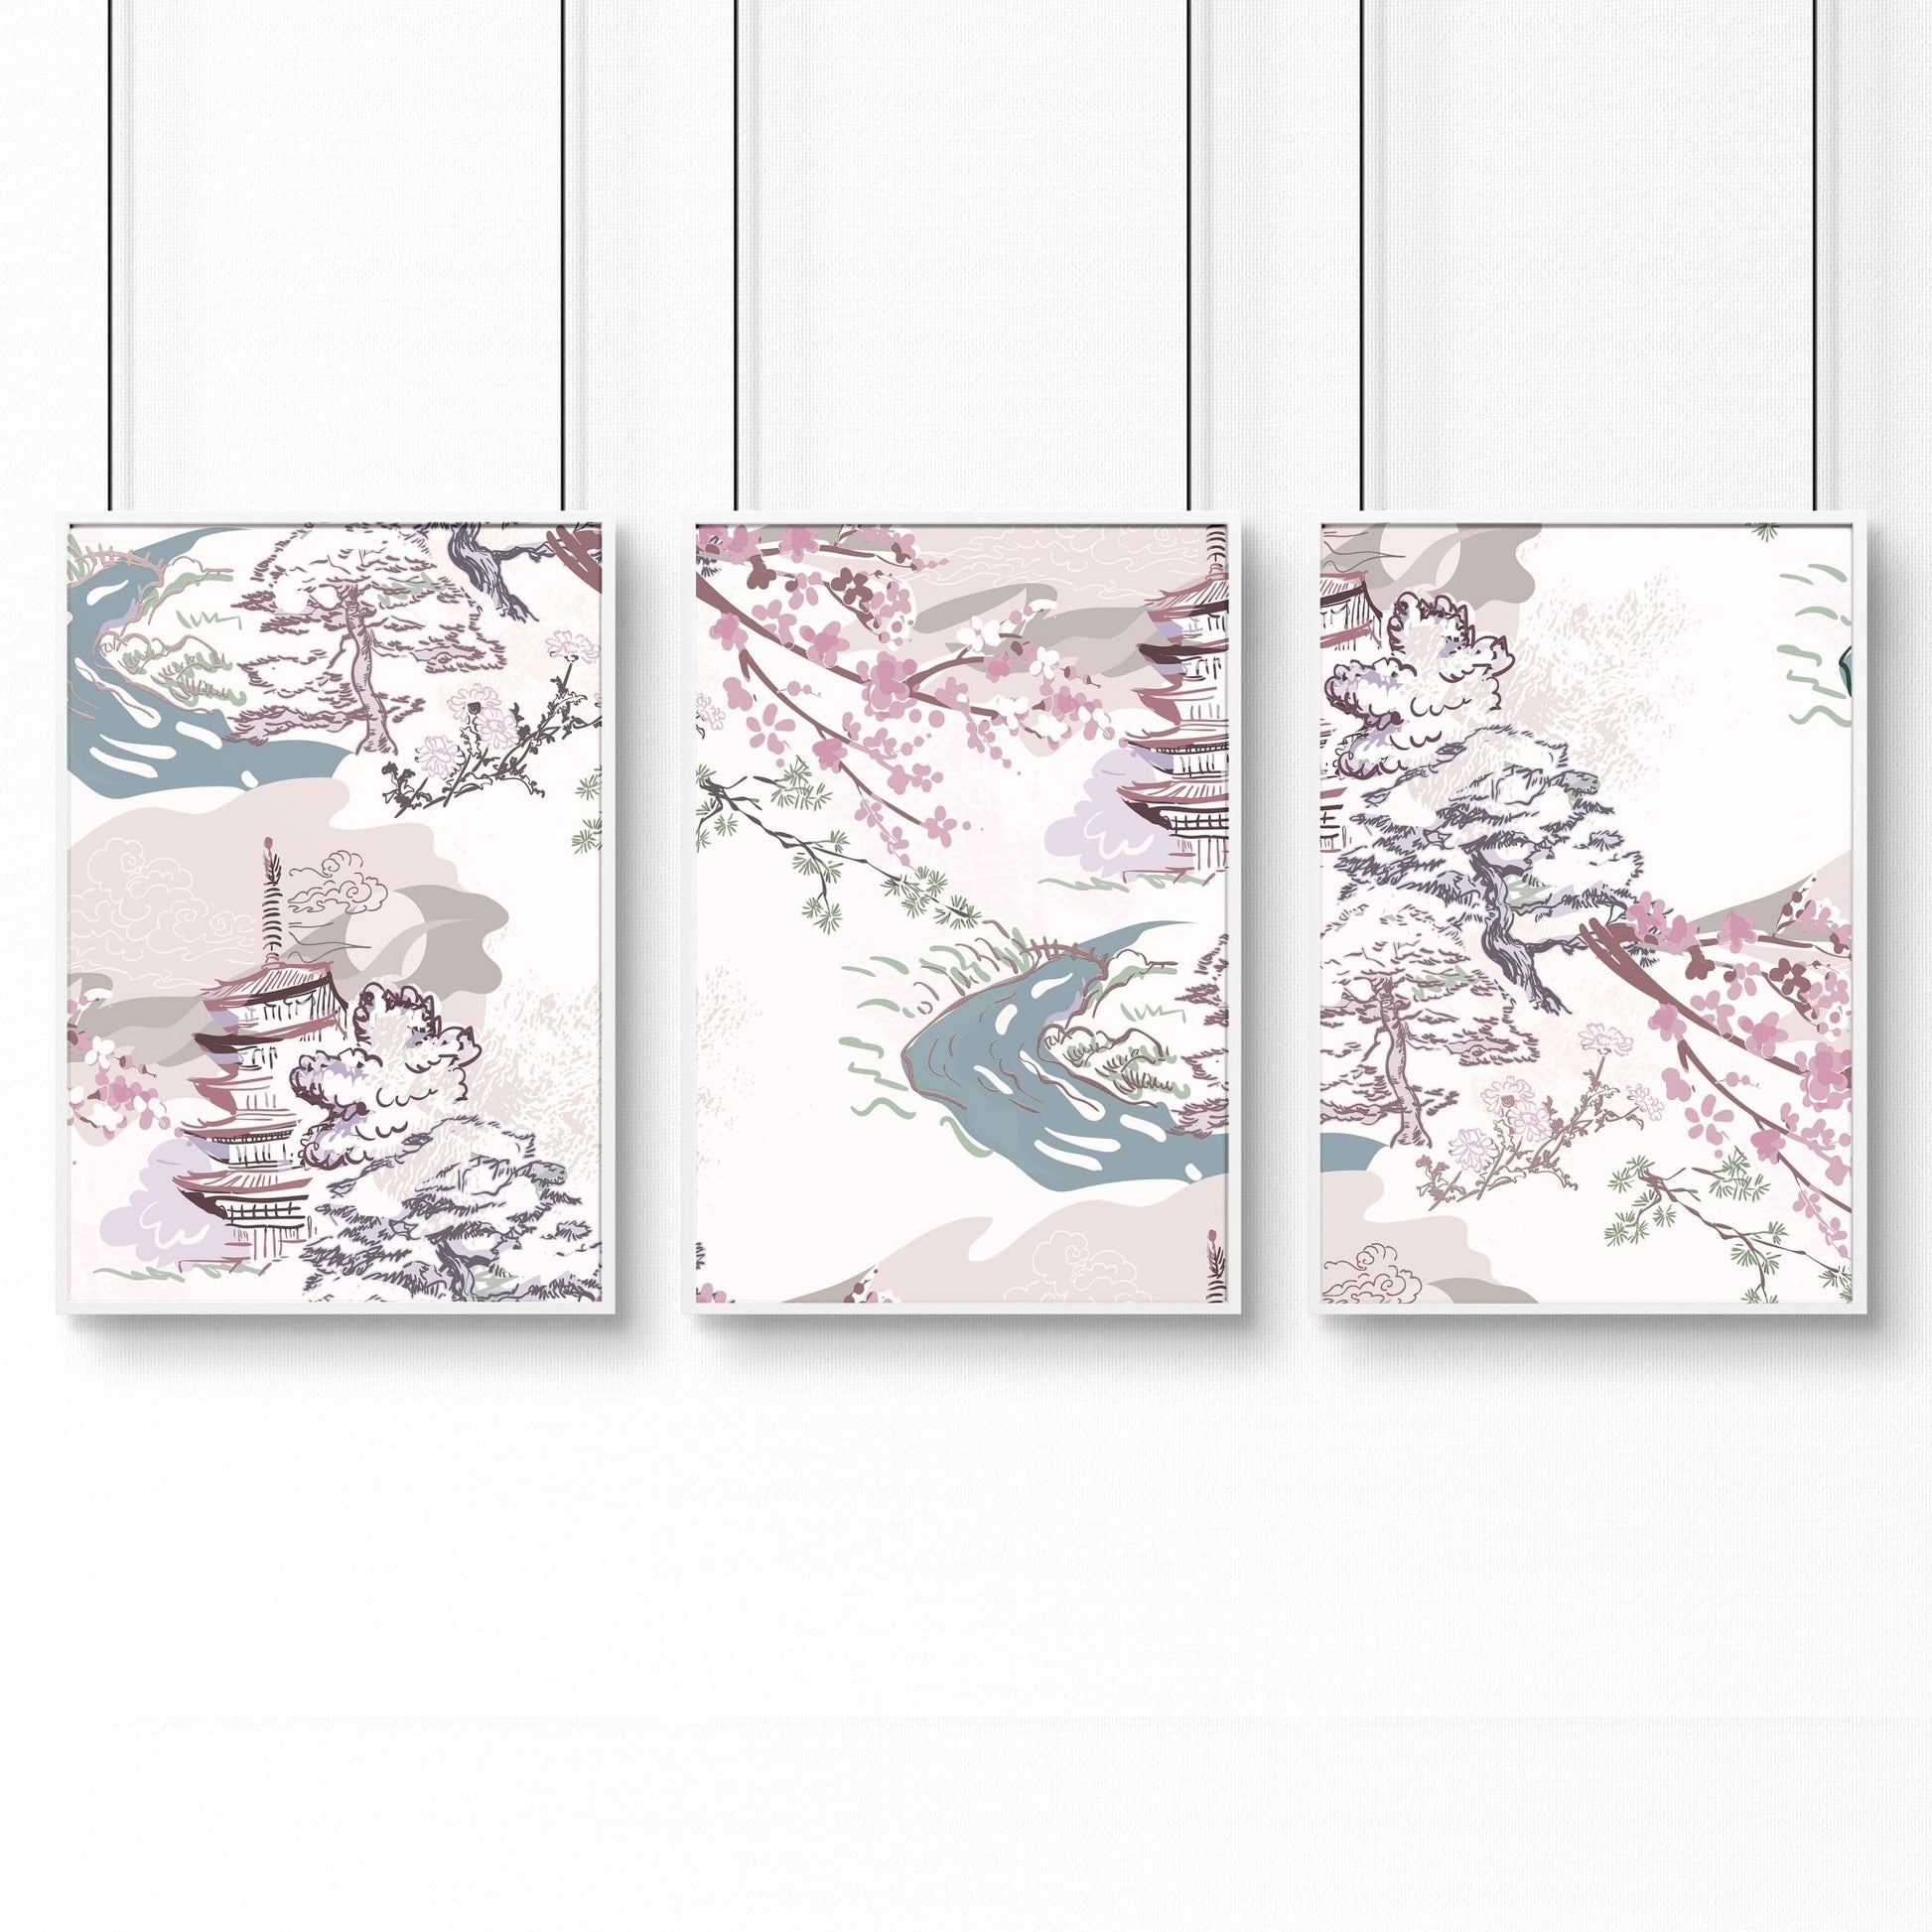 Art for a bathroom | set of 3 wall prints - About Wall Art